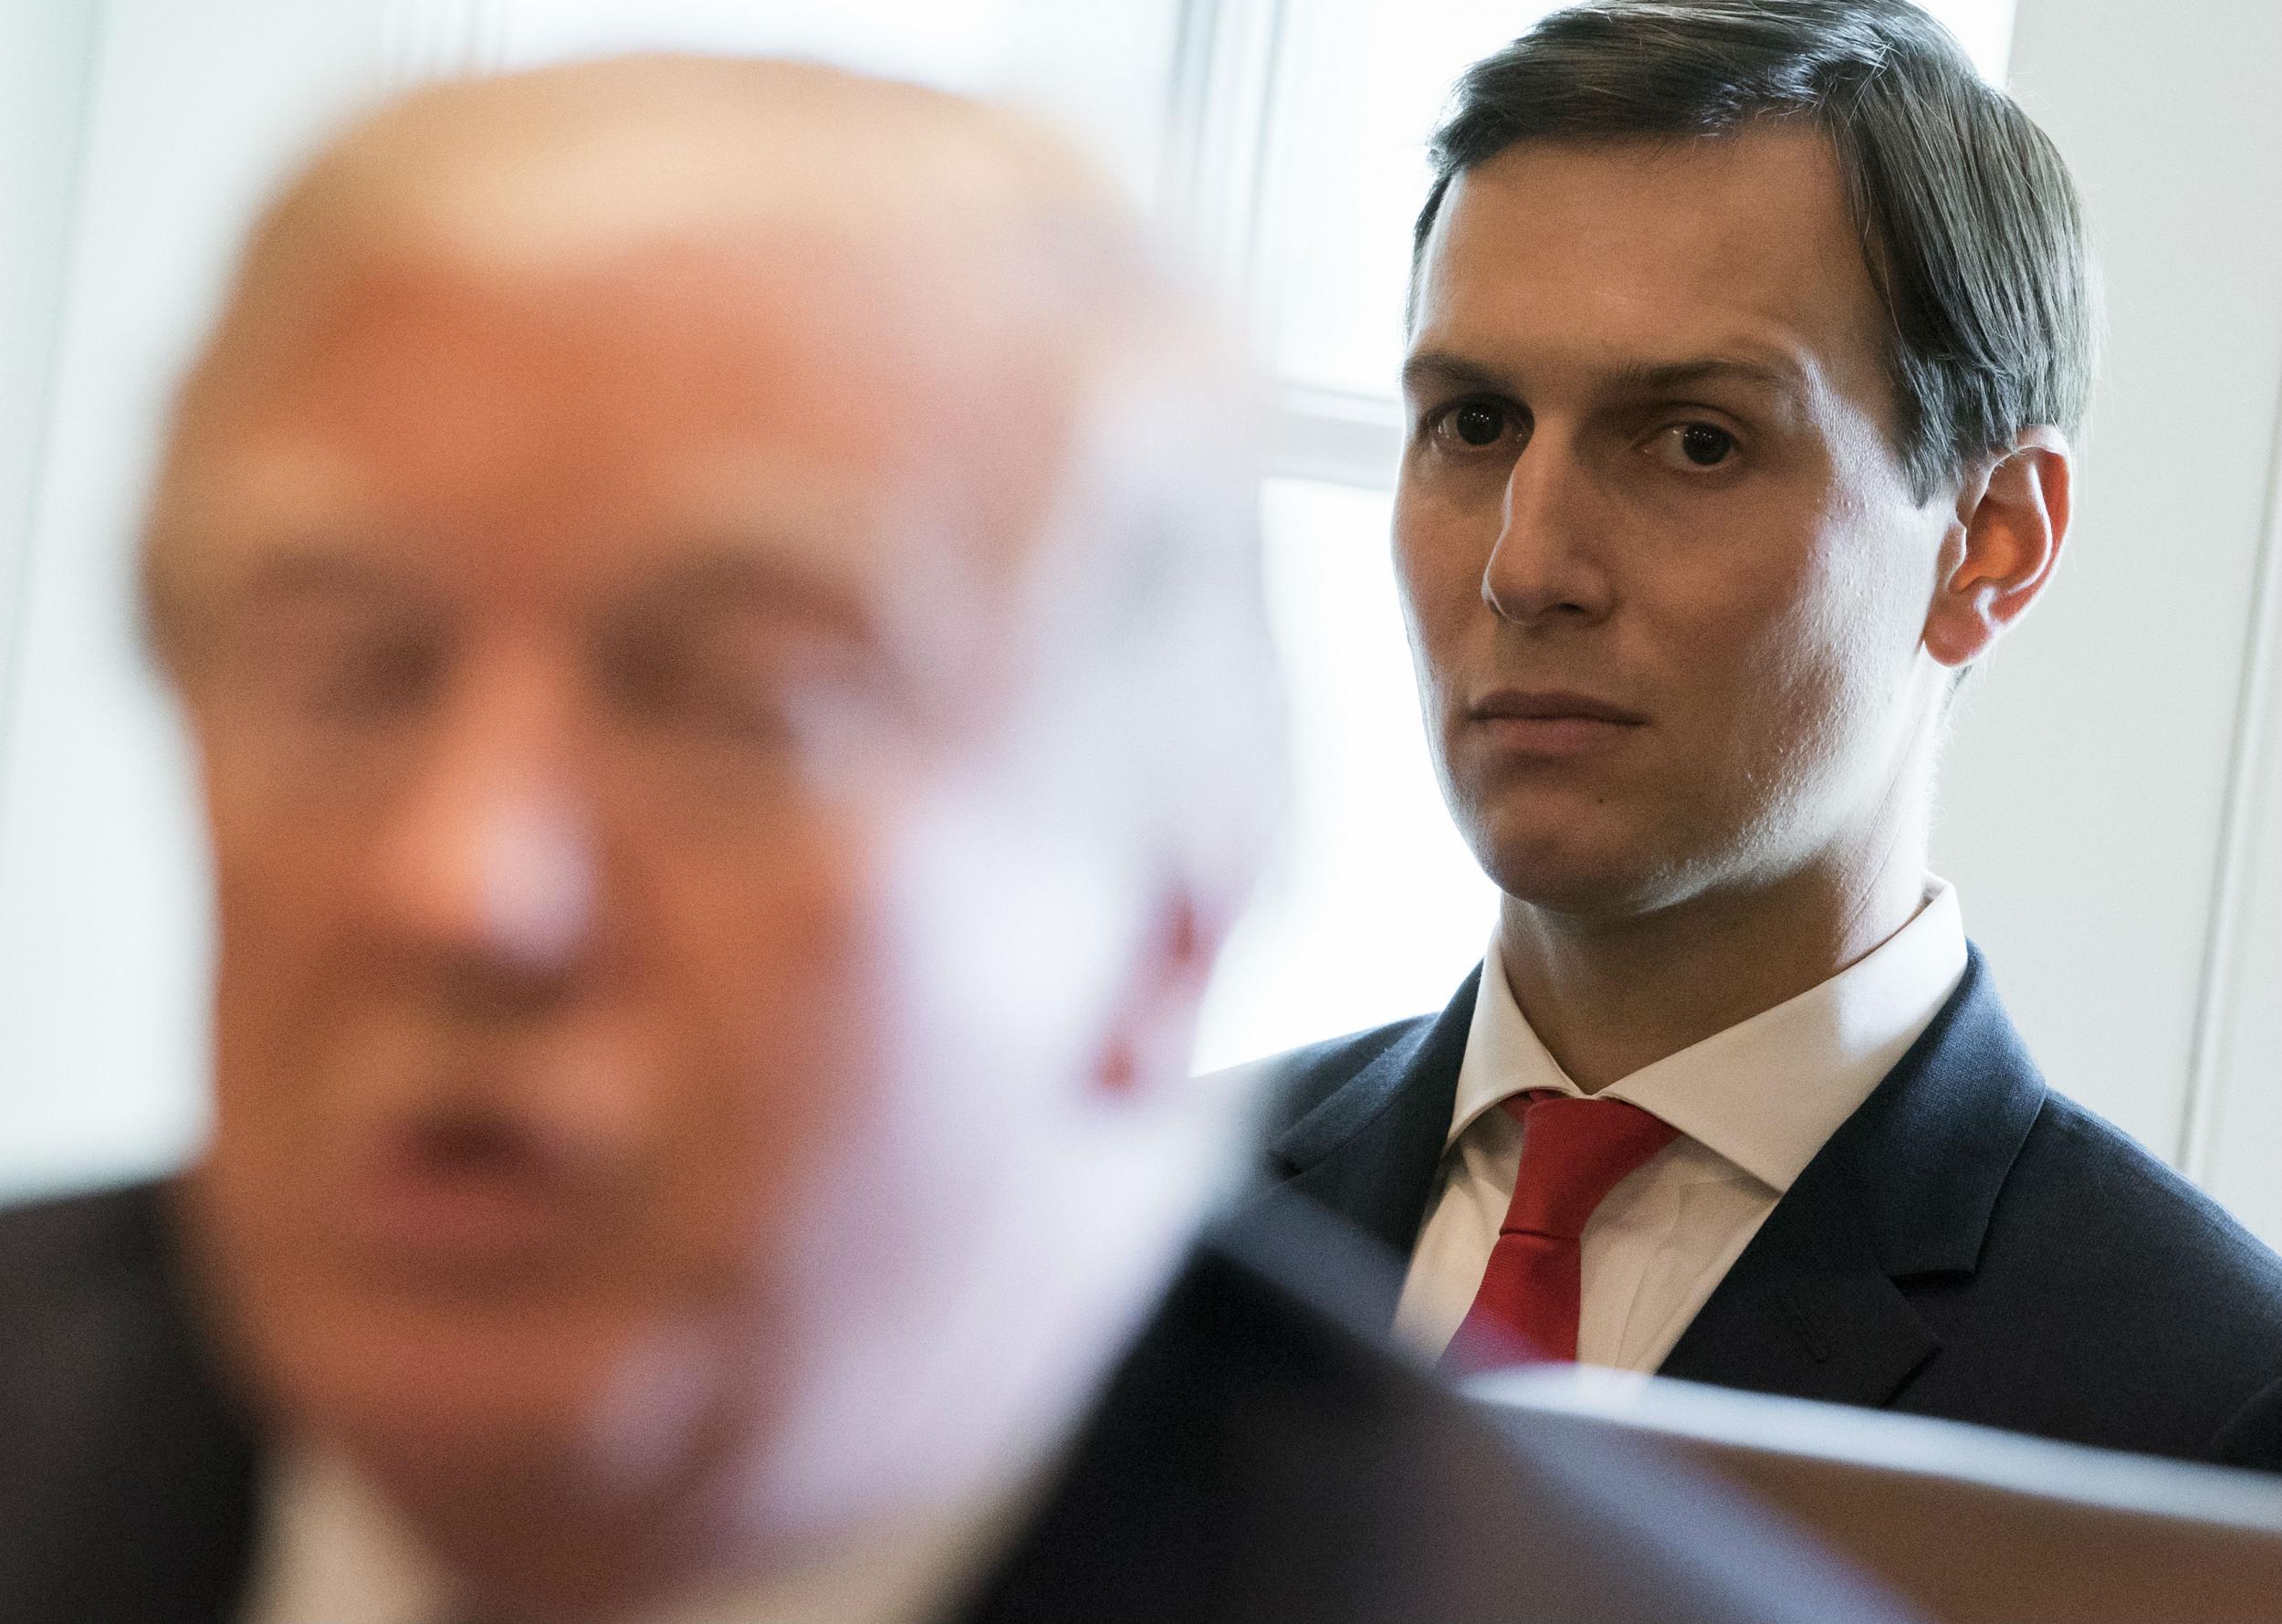 Jared Kushner looks on as his father-in-law speaks